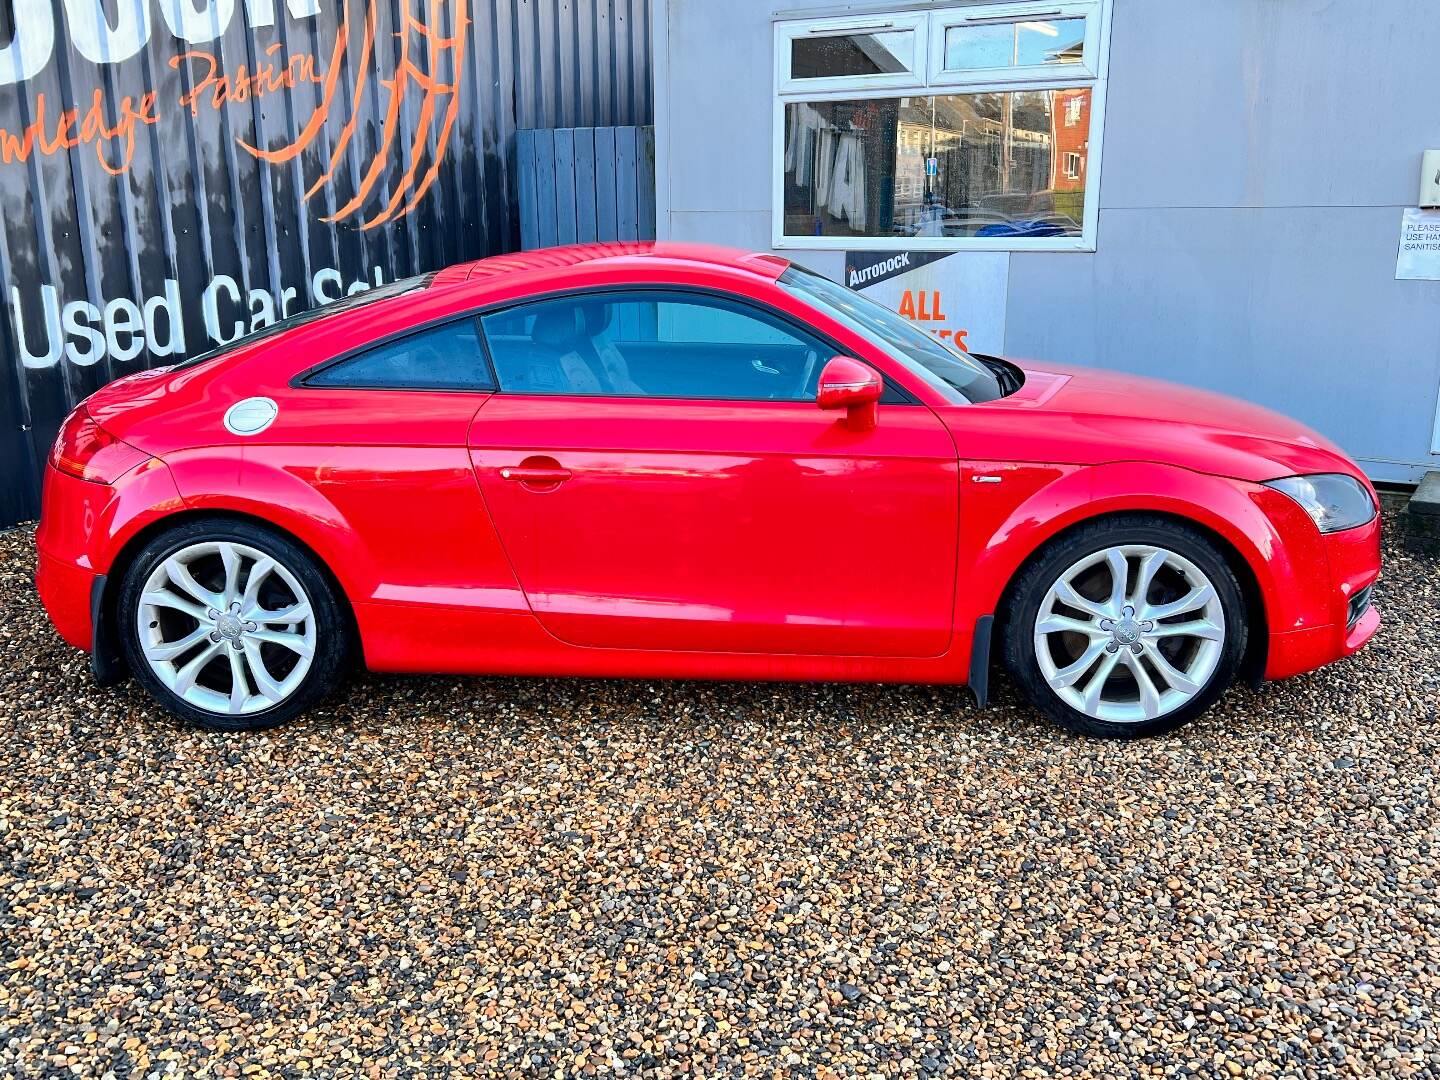 Audi TT COUPE SPECIAL EDITIONS in Antrim